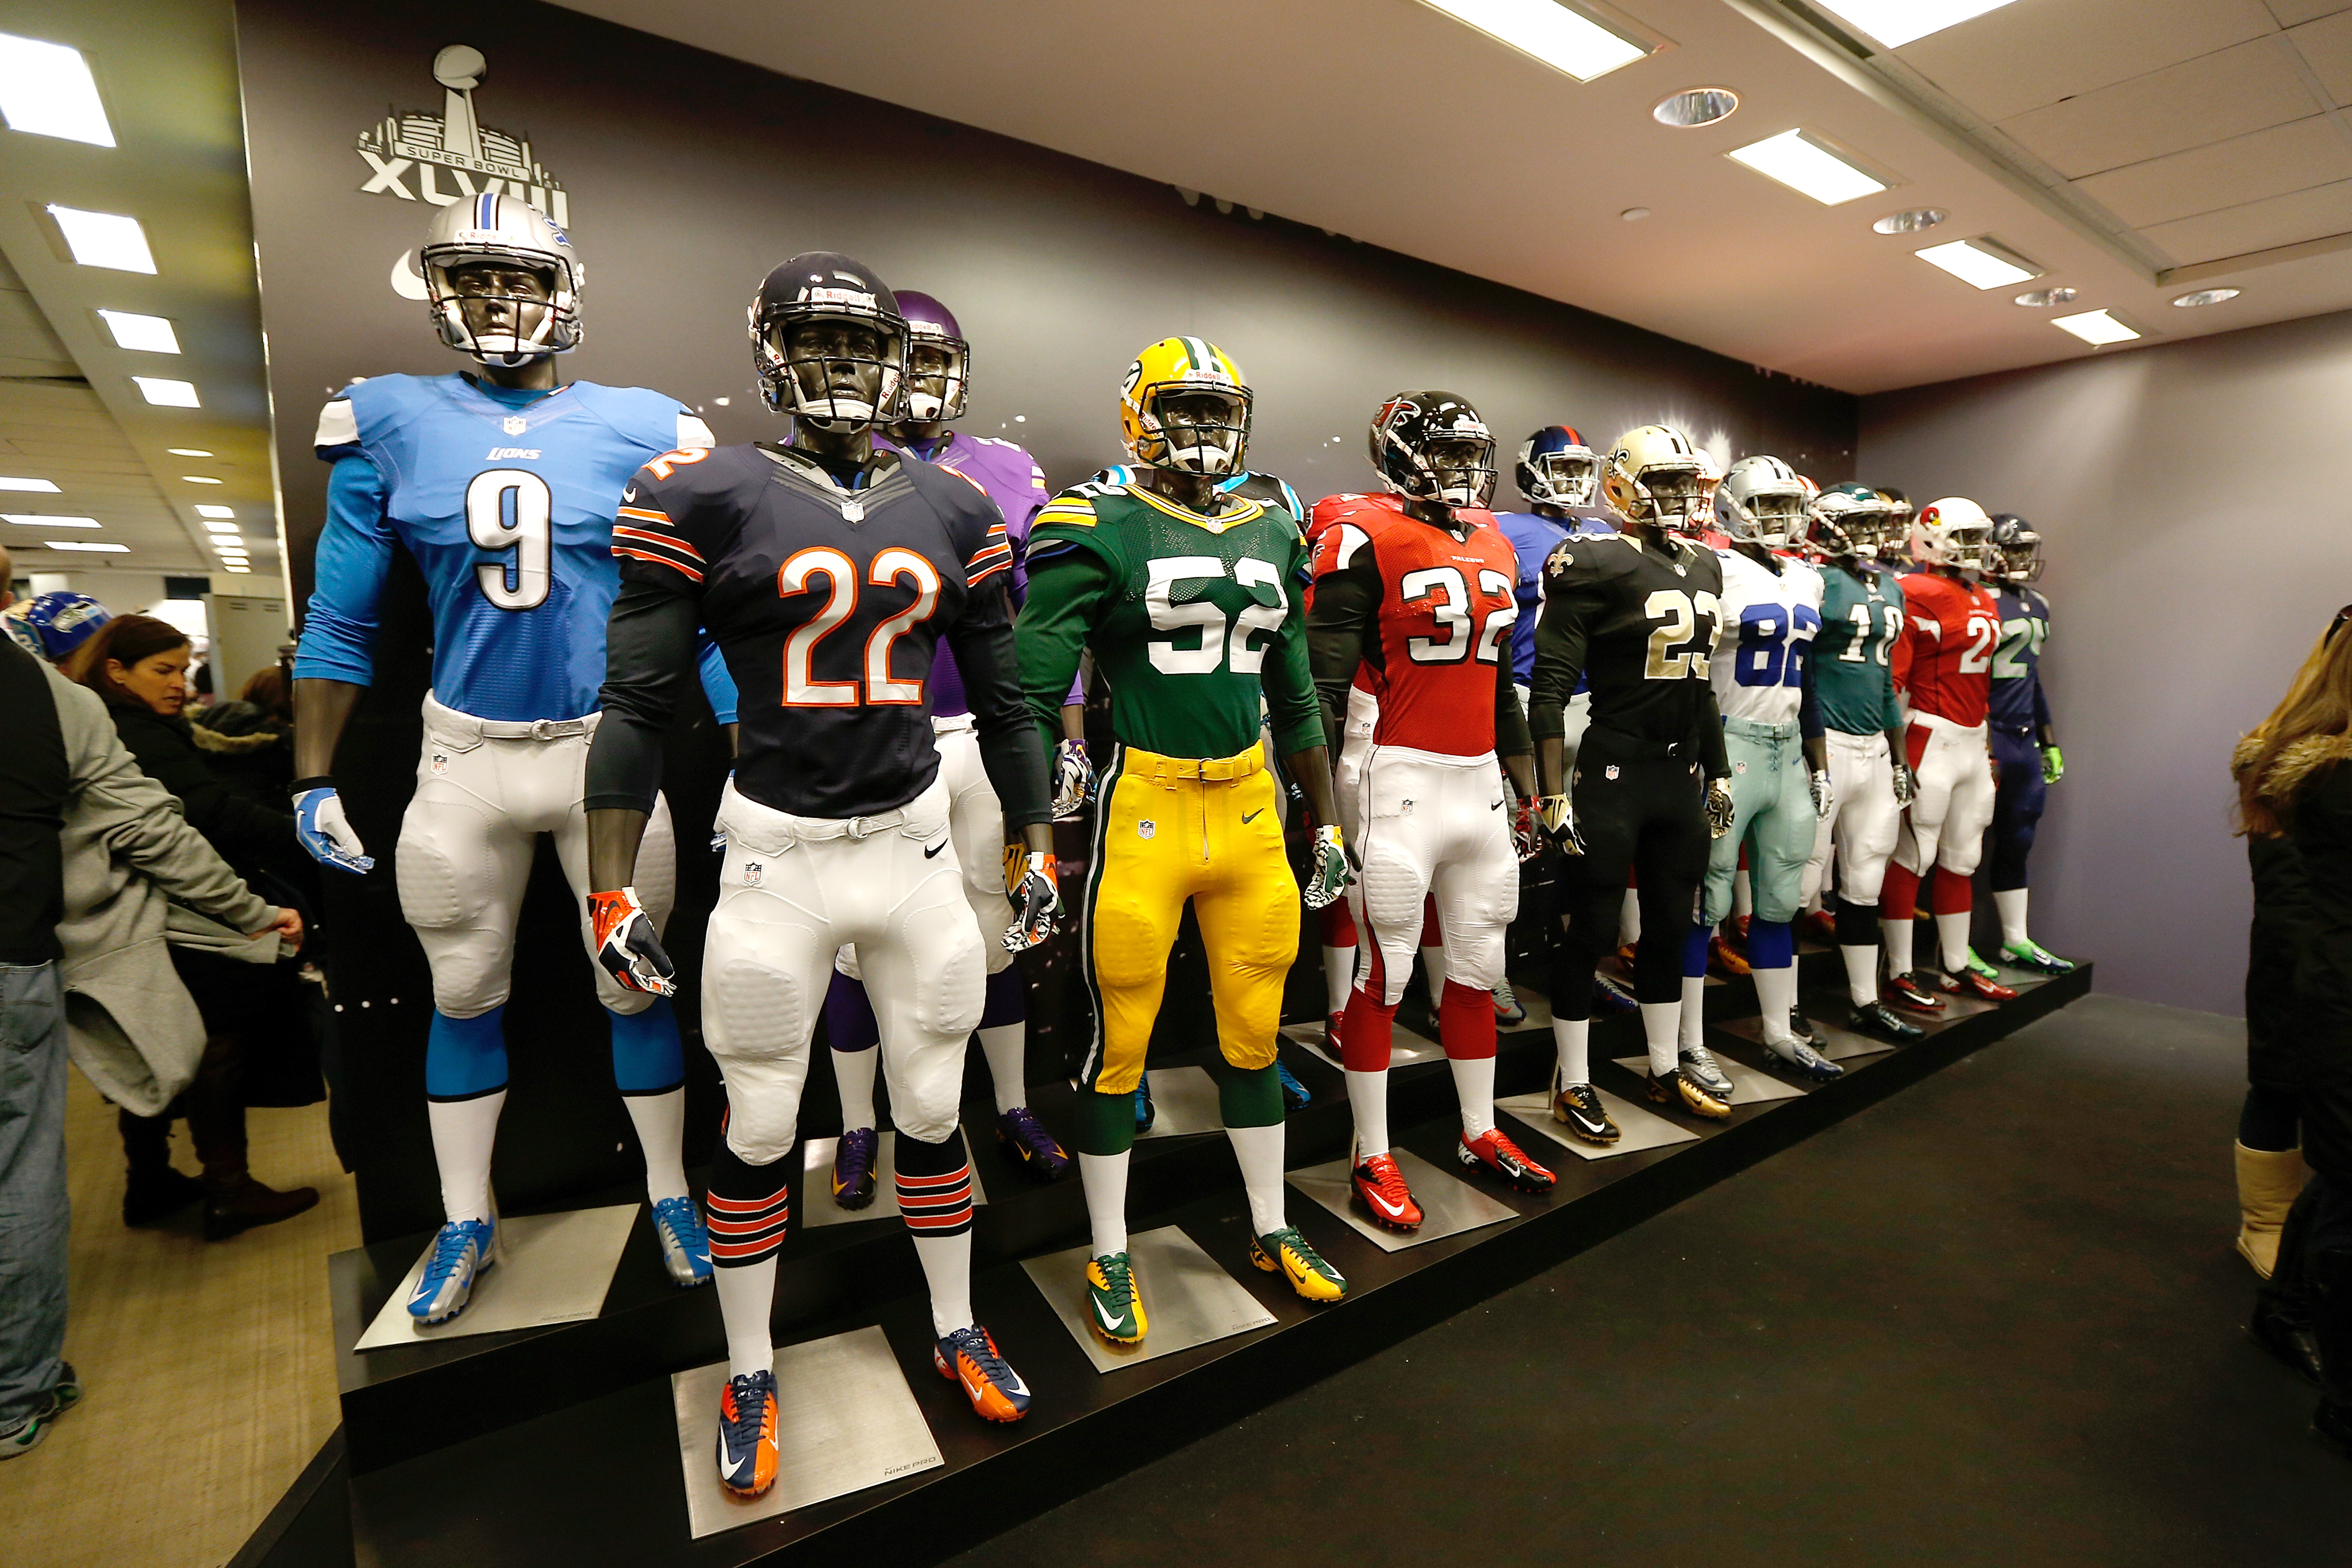 Rijke man Passend bruid NFL Jerseys Cost $295, Thanks to Price Increase from Nike | Time